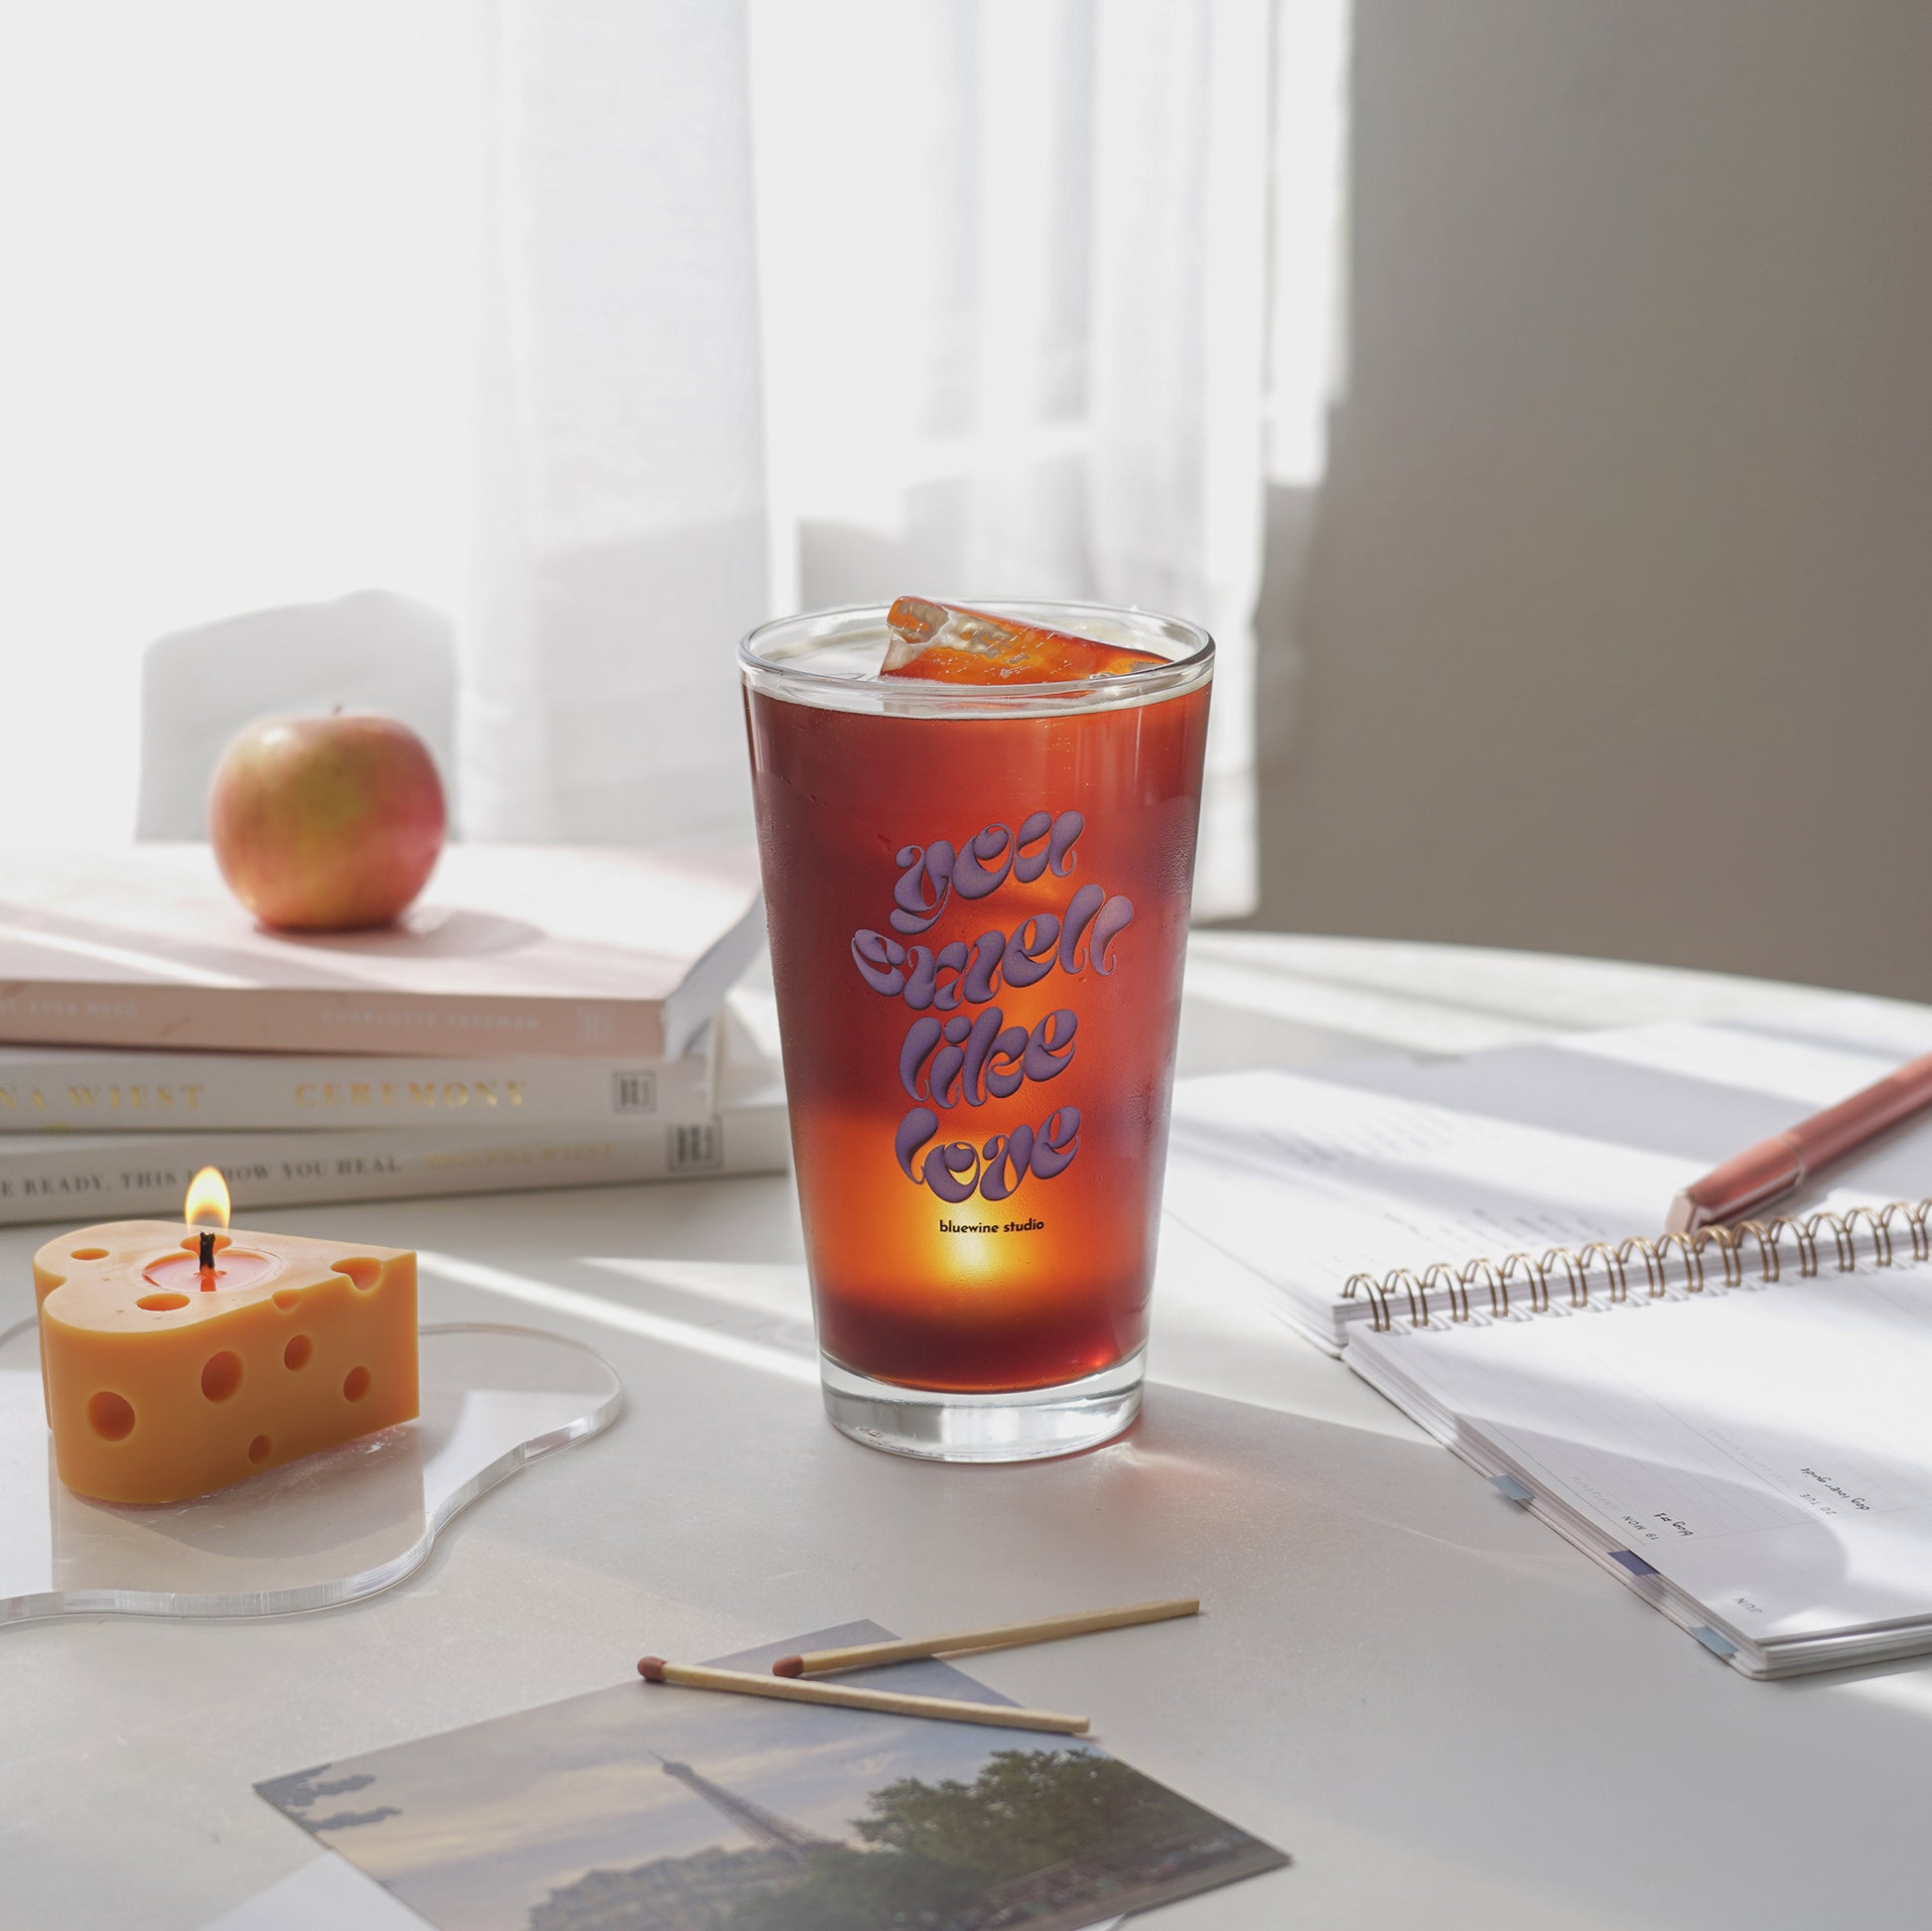 iced coffee in a 16 oz you smell like love glass, a lit cheese candle on a clear irregular shaped acrylic coaster, planner, apple, and books on the table